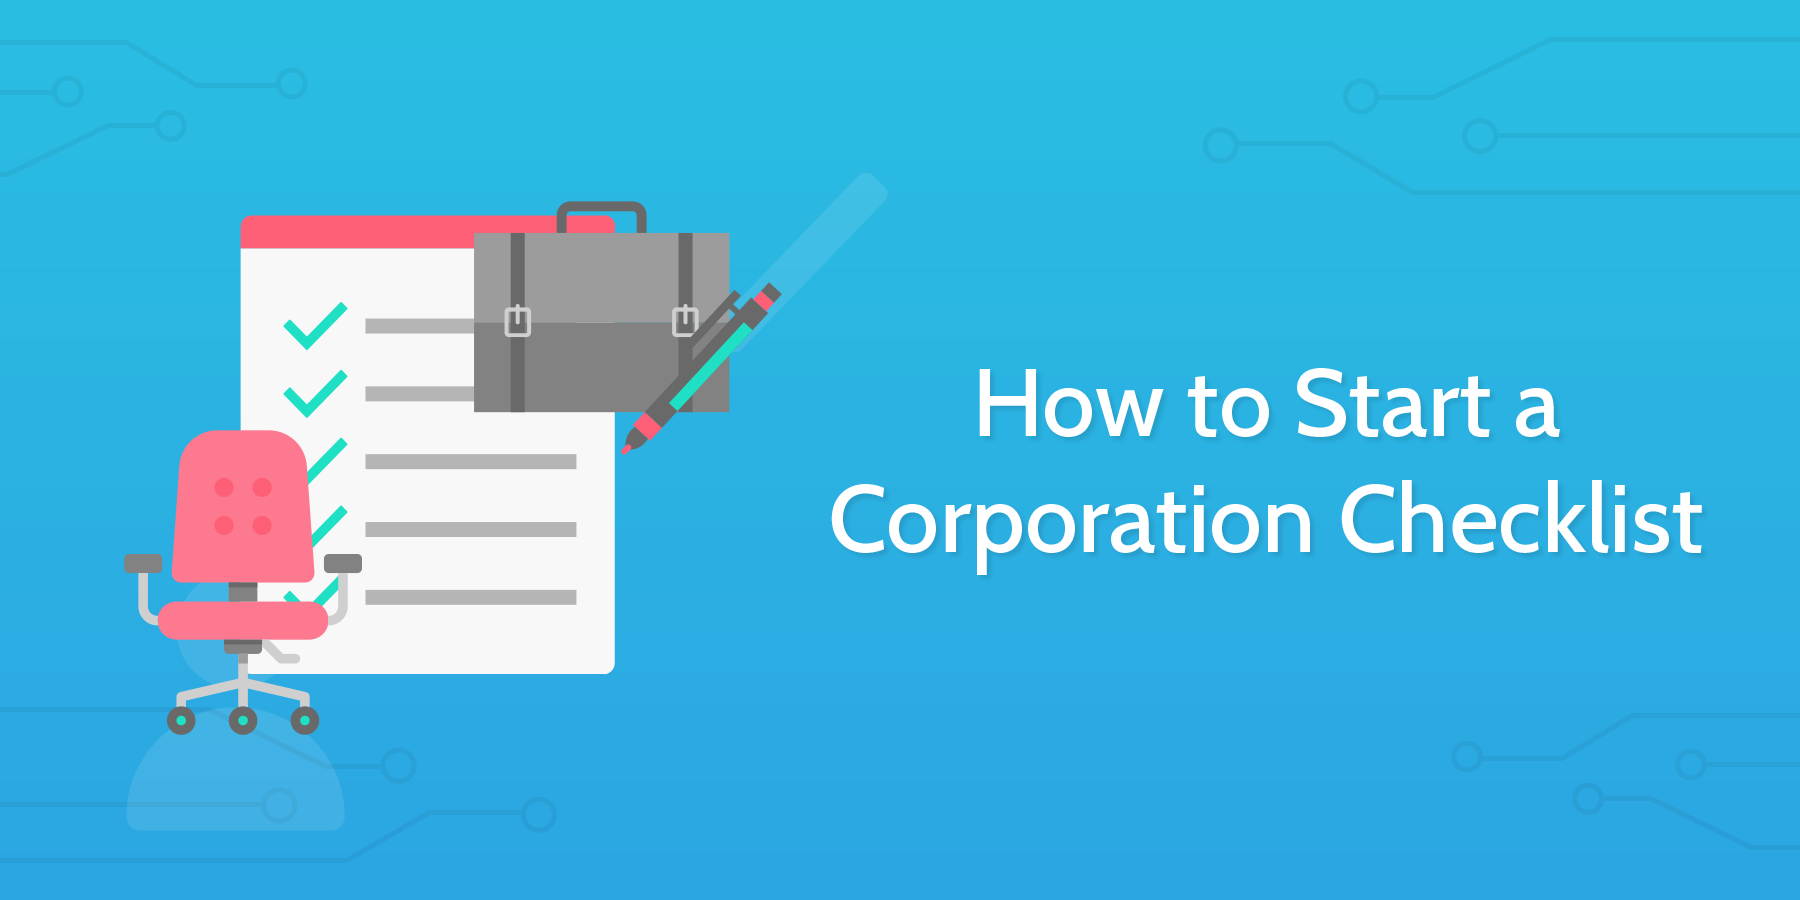 How to Start a Corporation Checklist